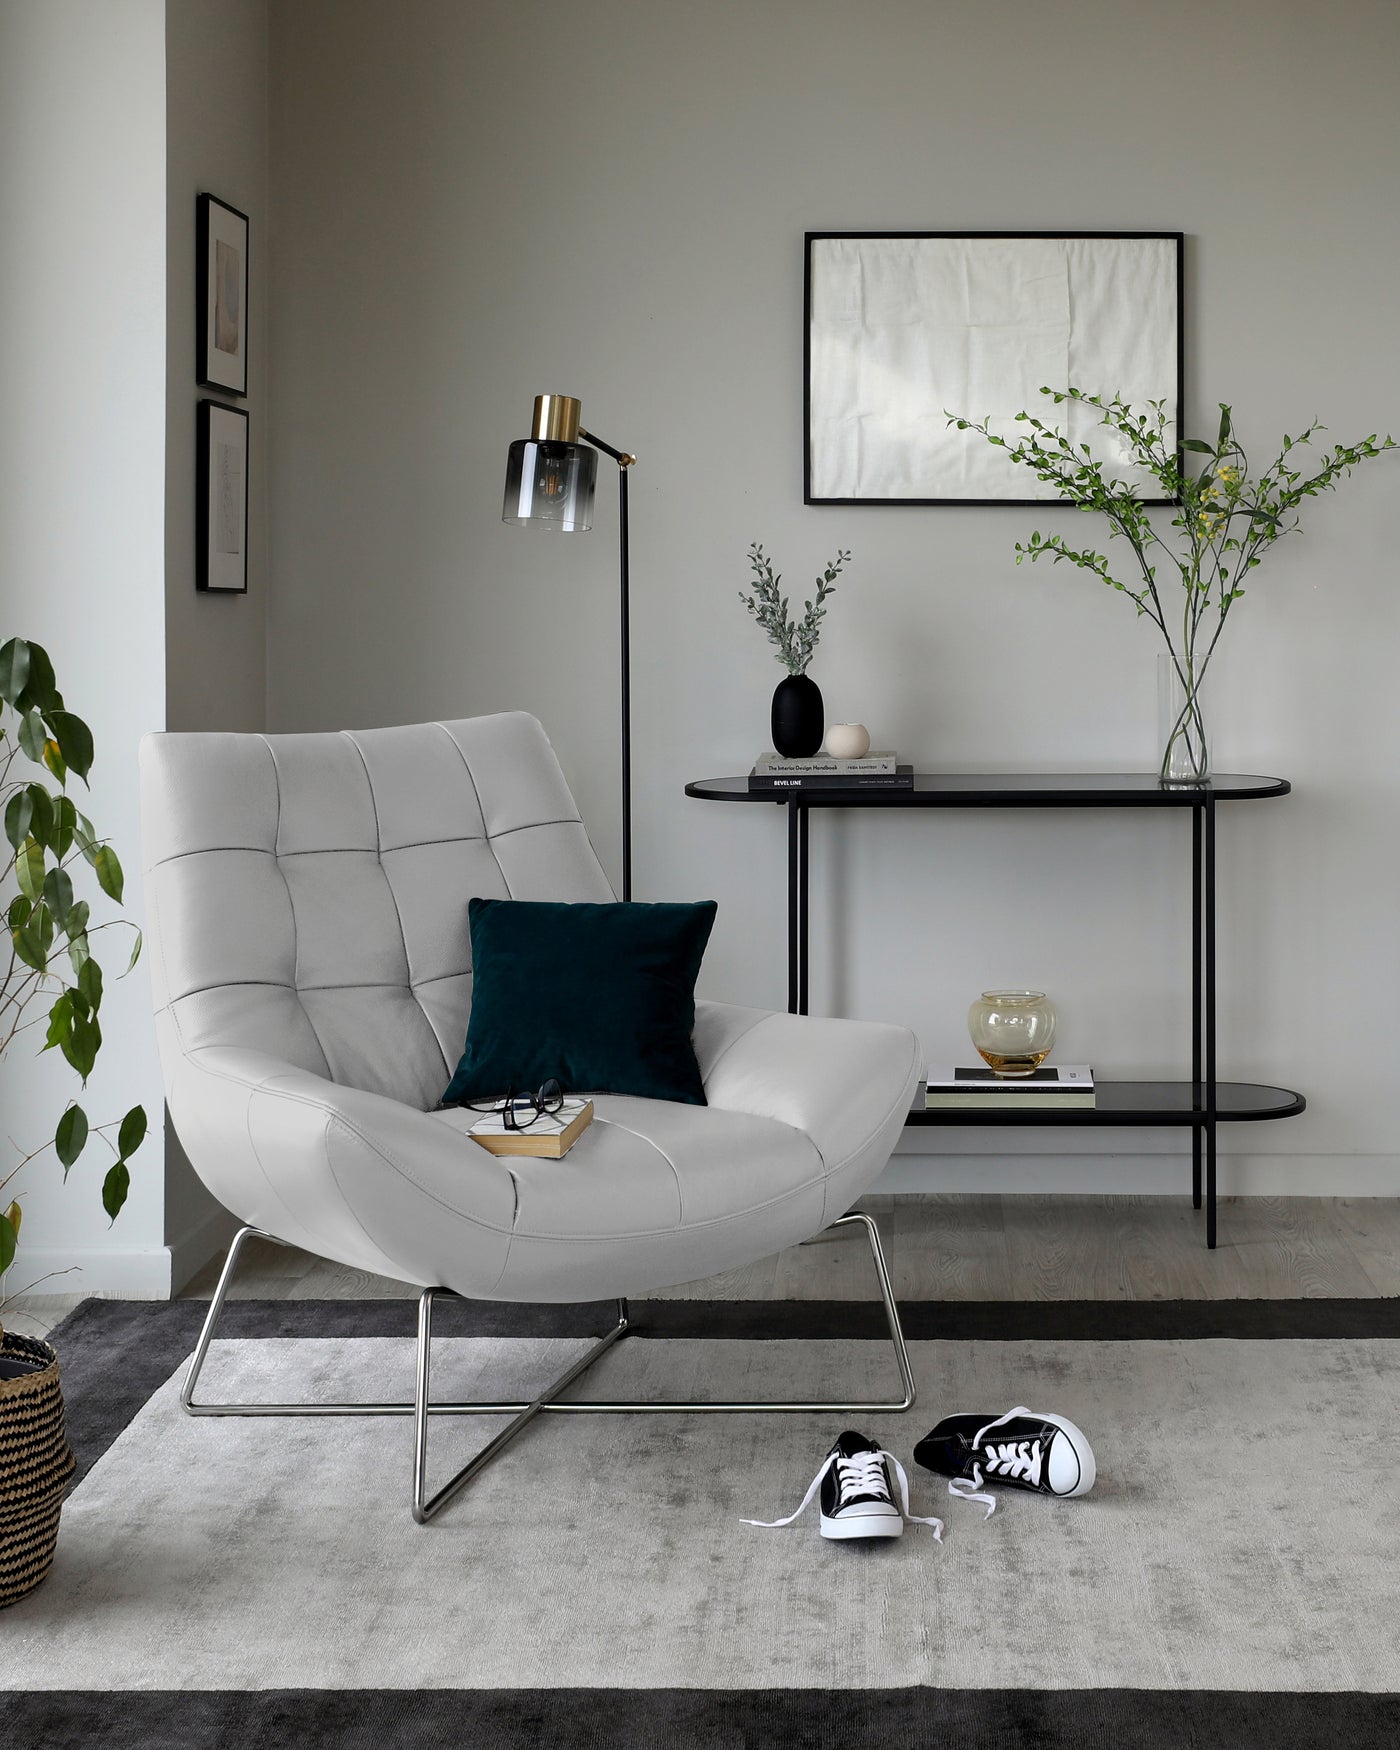 Modern light grey upholstered armchair with a unique curved design and slim silver metal legs. Behind it is a sleek, round-edged rectangular black console table with thin metal legs, adorned with minimalistic decorative items. Both pieces complement a contemporary interior aesthetic.